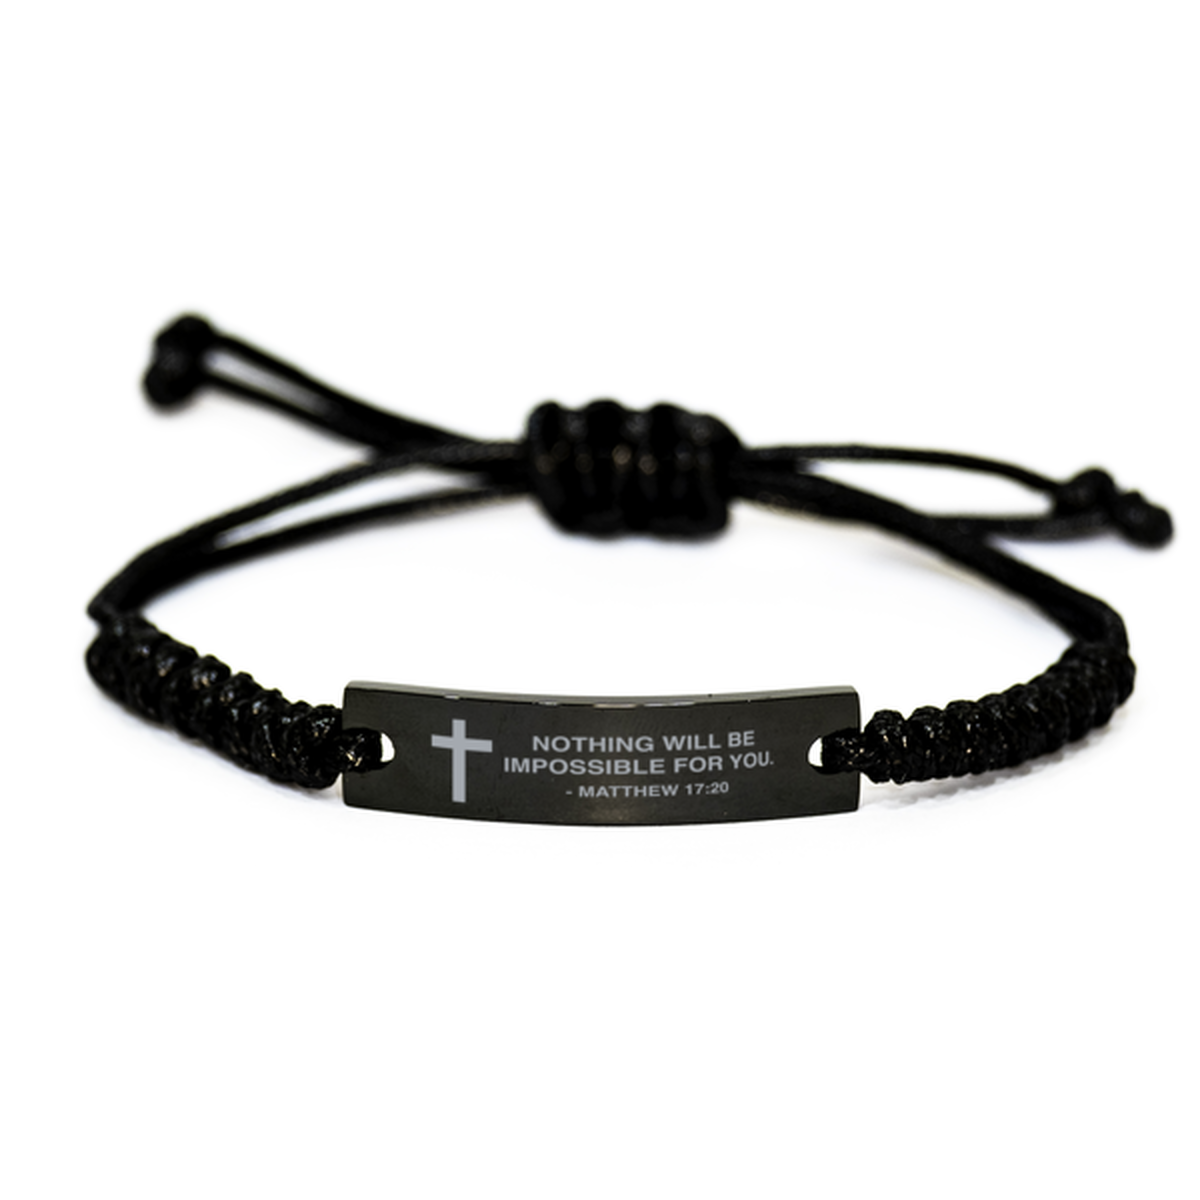 Bible Verse Rope Bracelet, Nothing Will Be Impossible For You, Matthew 17:20, Inspirational Christian Gifts For Men Women